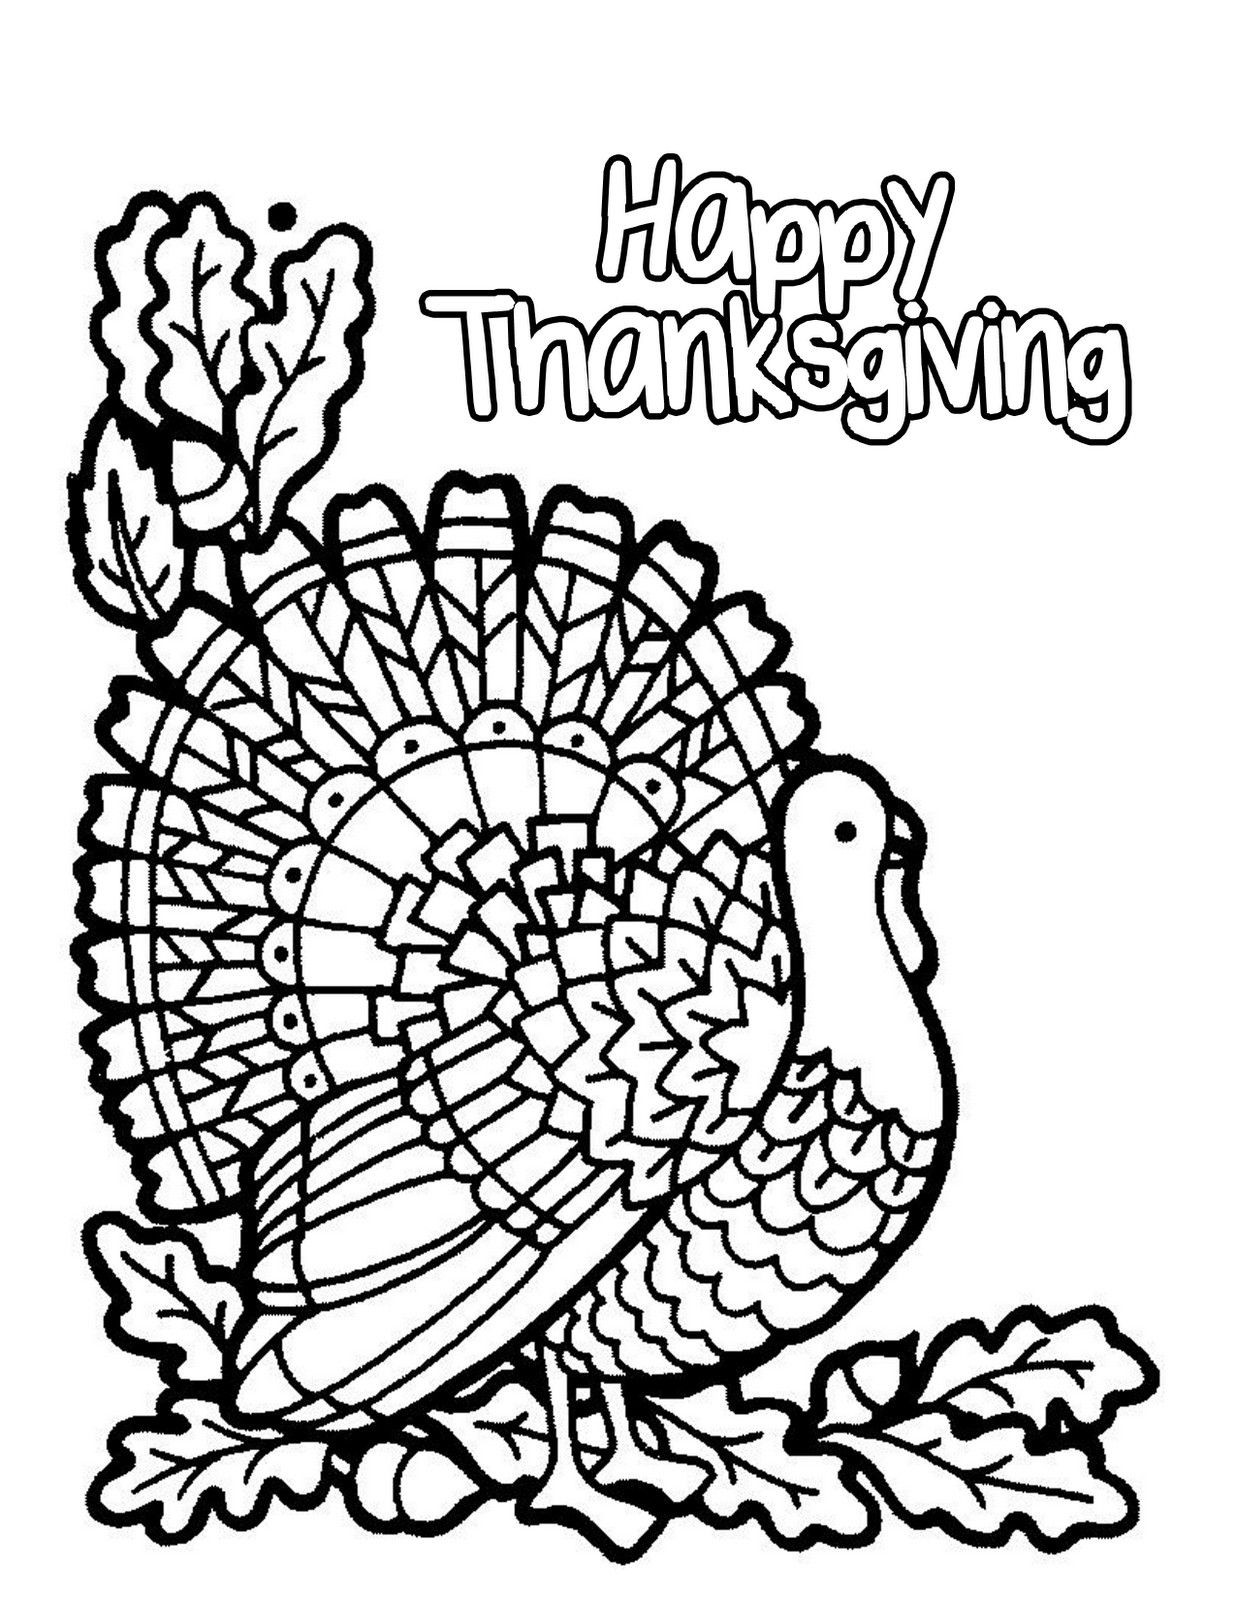 Free Printable Turkey Coloring Pages
 Printable Thanksgiving Coloring Pages